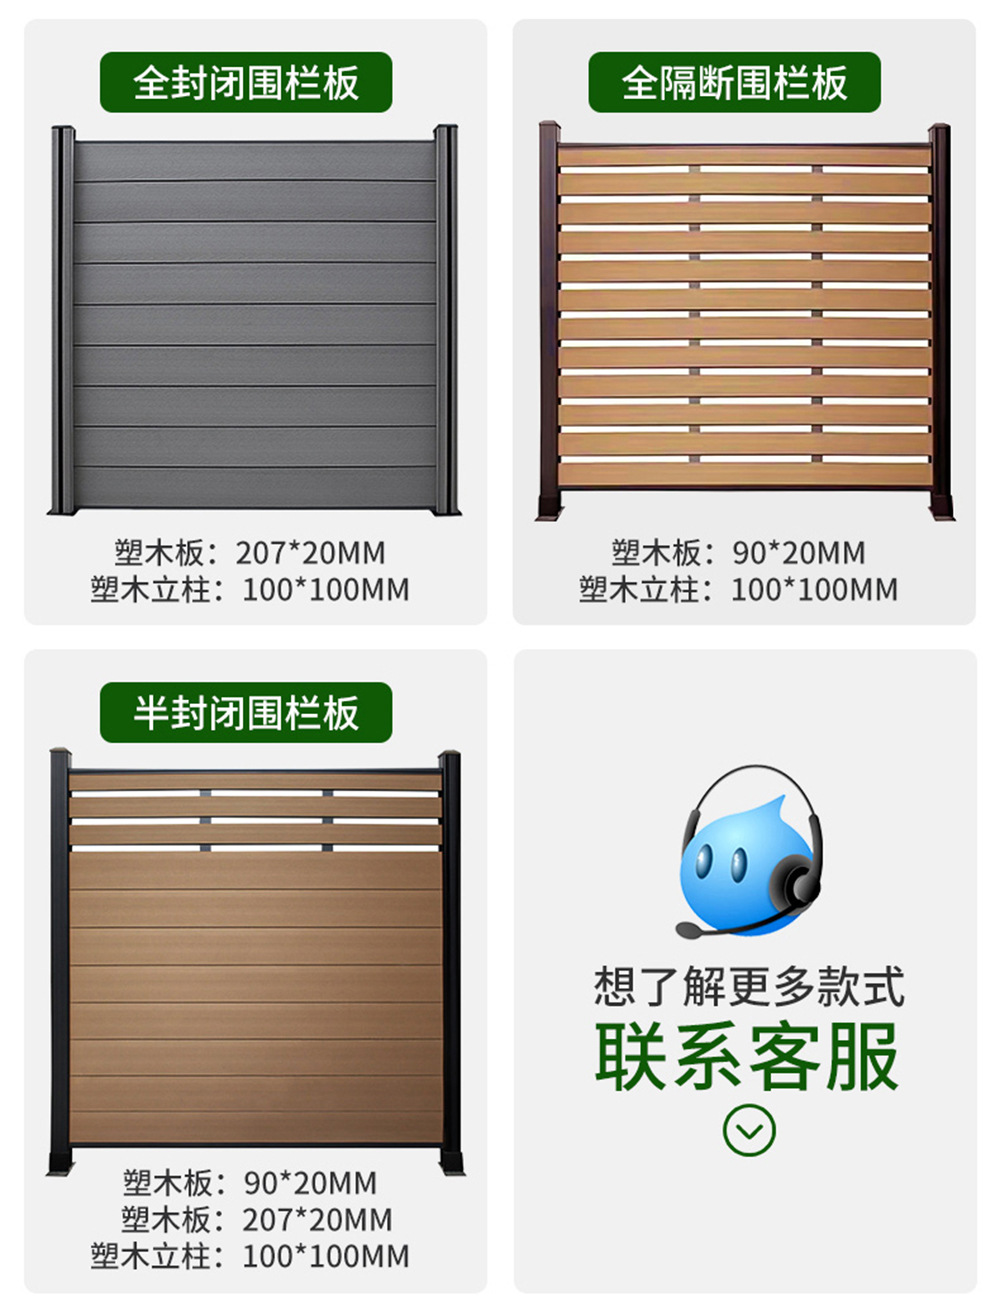 Fully enclosed plastic wood fence, outdoor wood plastic fence, outdoor courtyard wall panel, garden fence panel